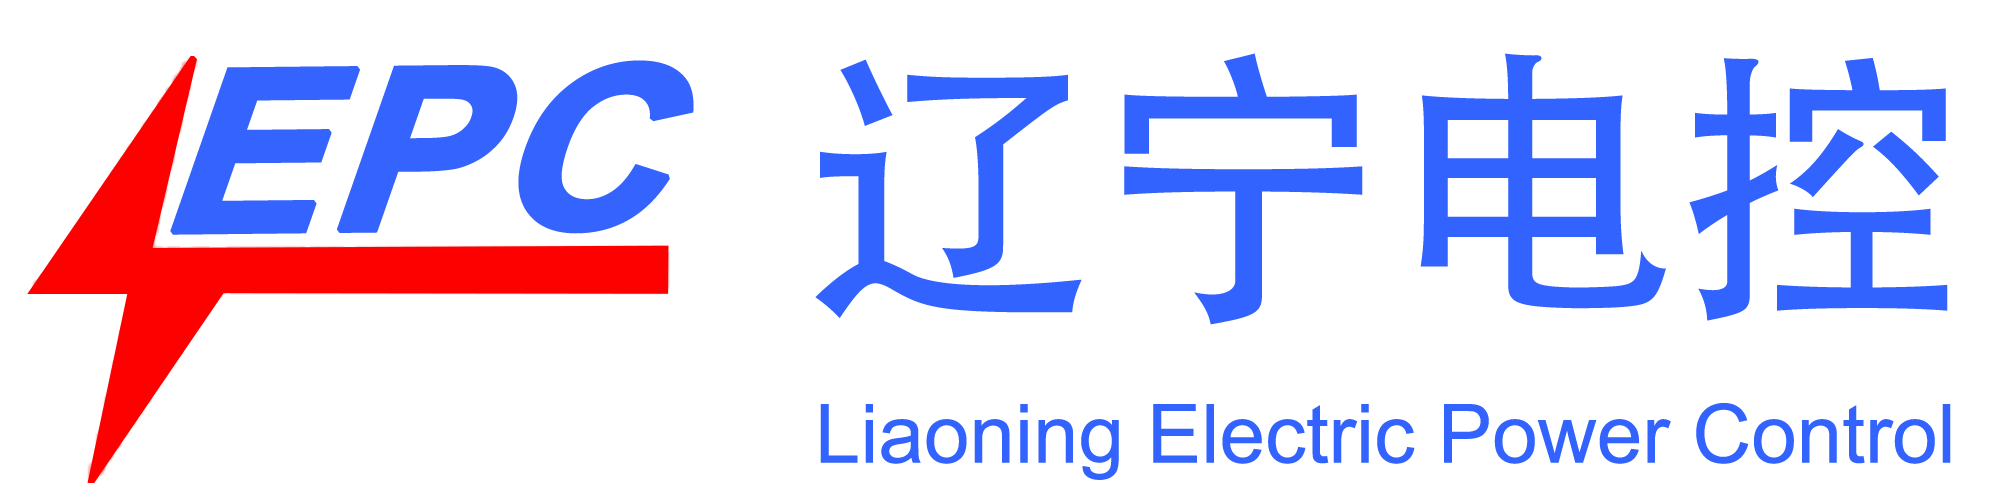 Liaoning Electric Power Control Technology Co., Ltd